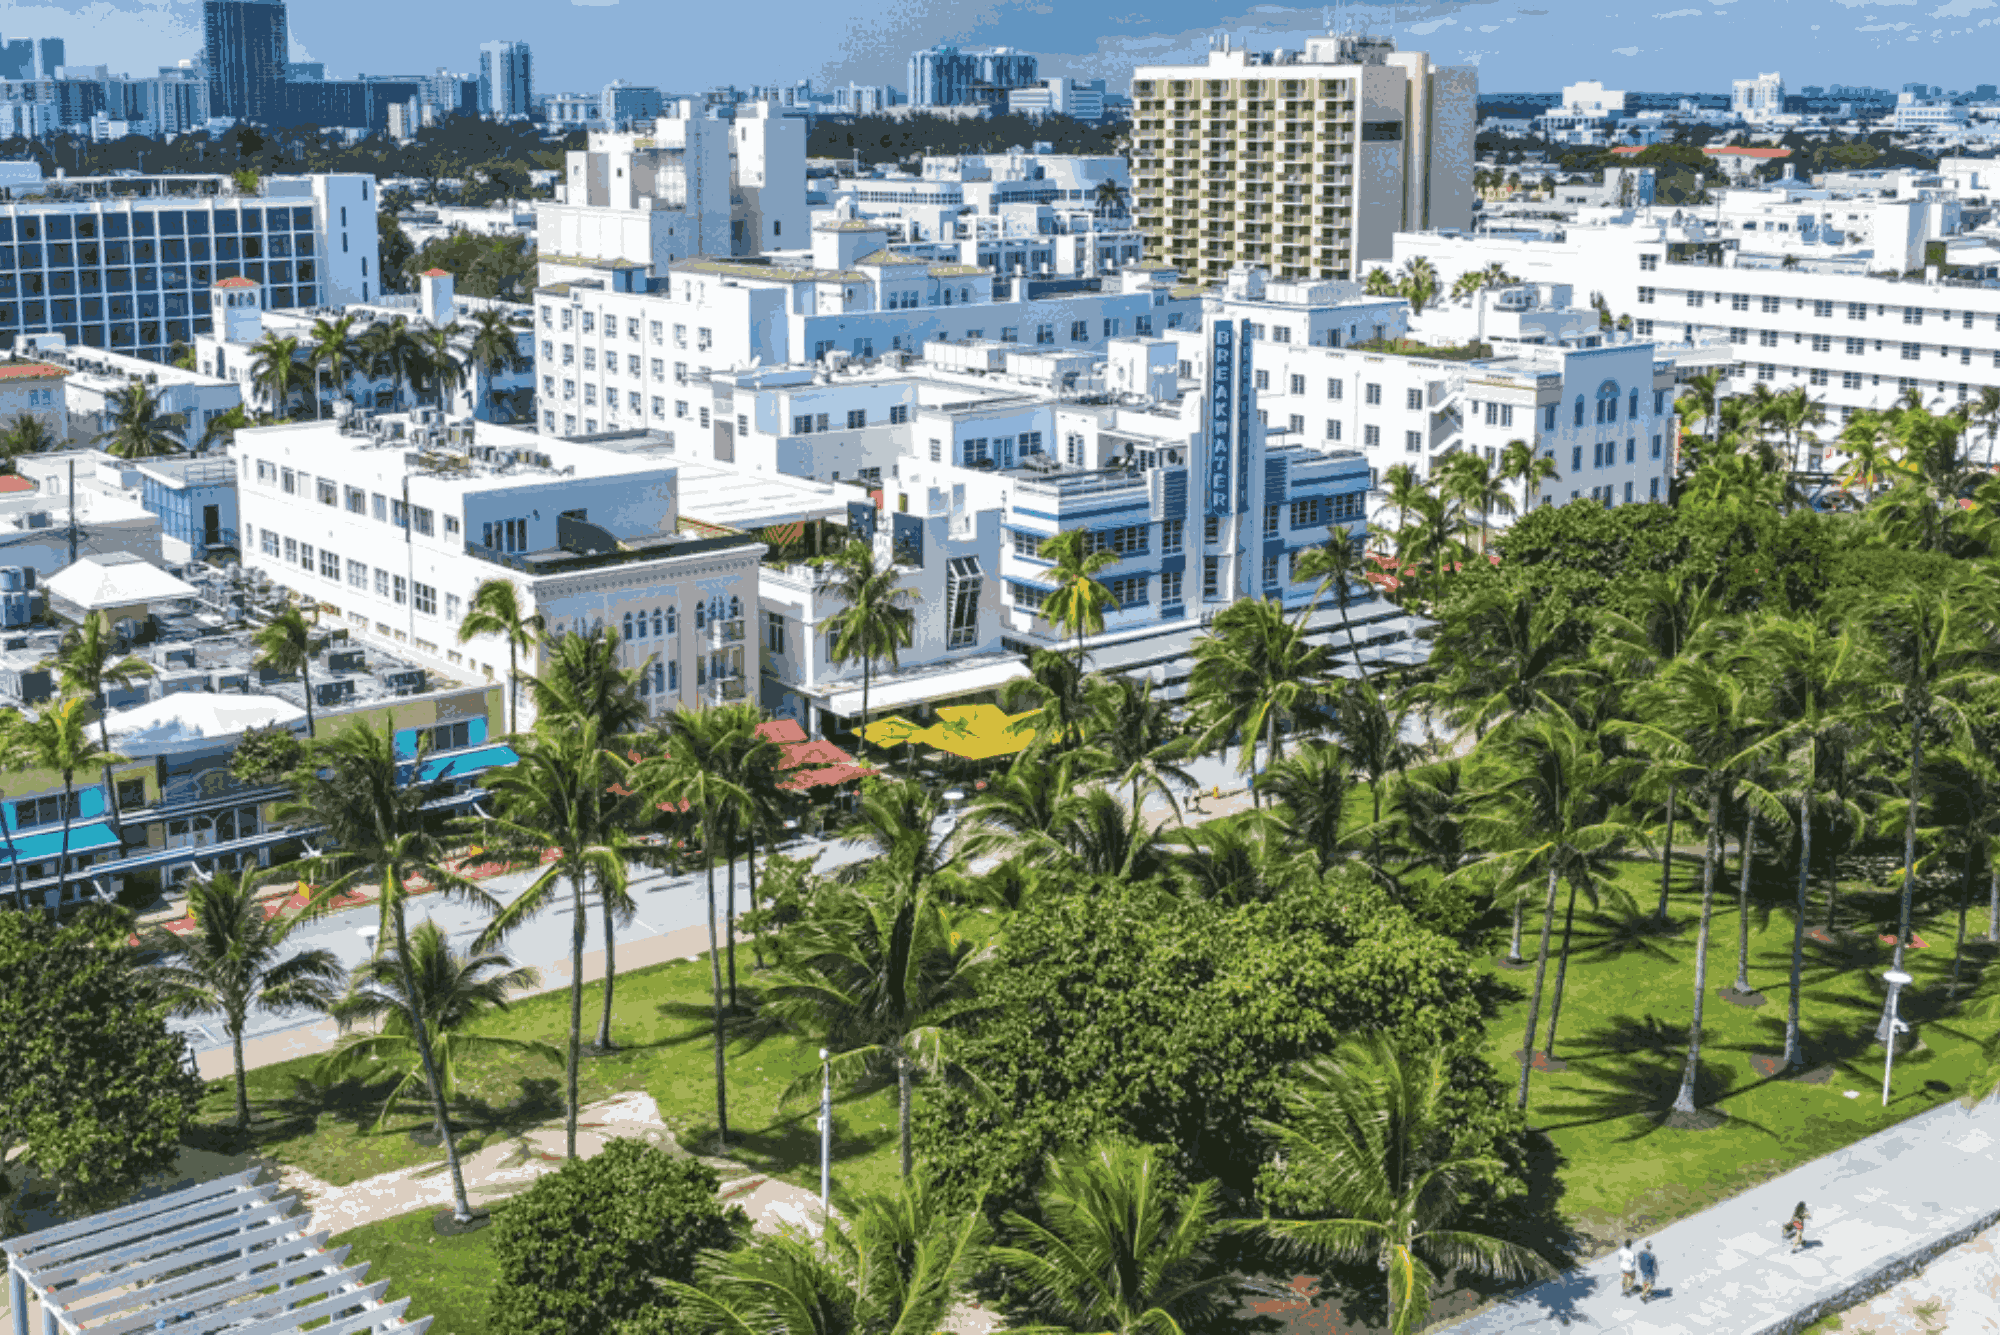 Best Things to Do in South Beach Miami